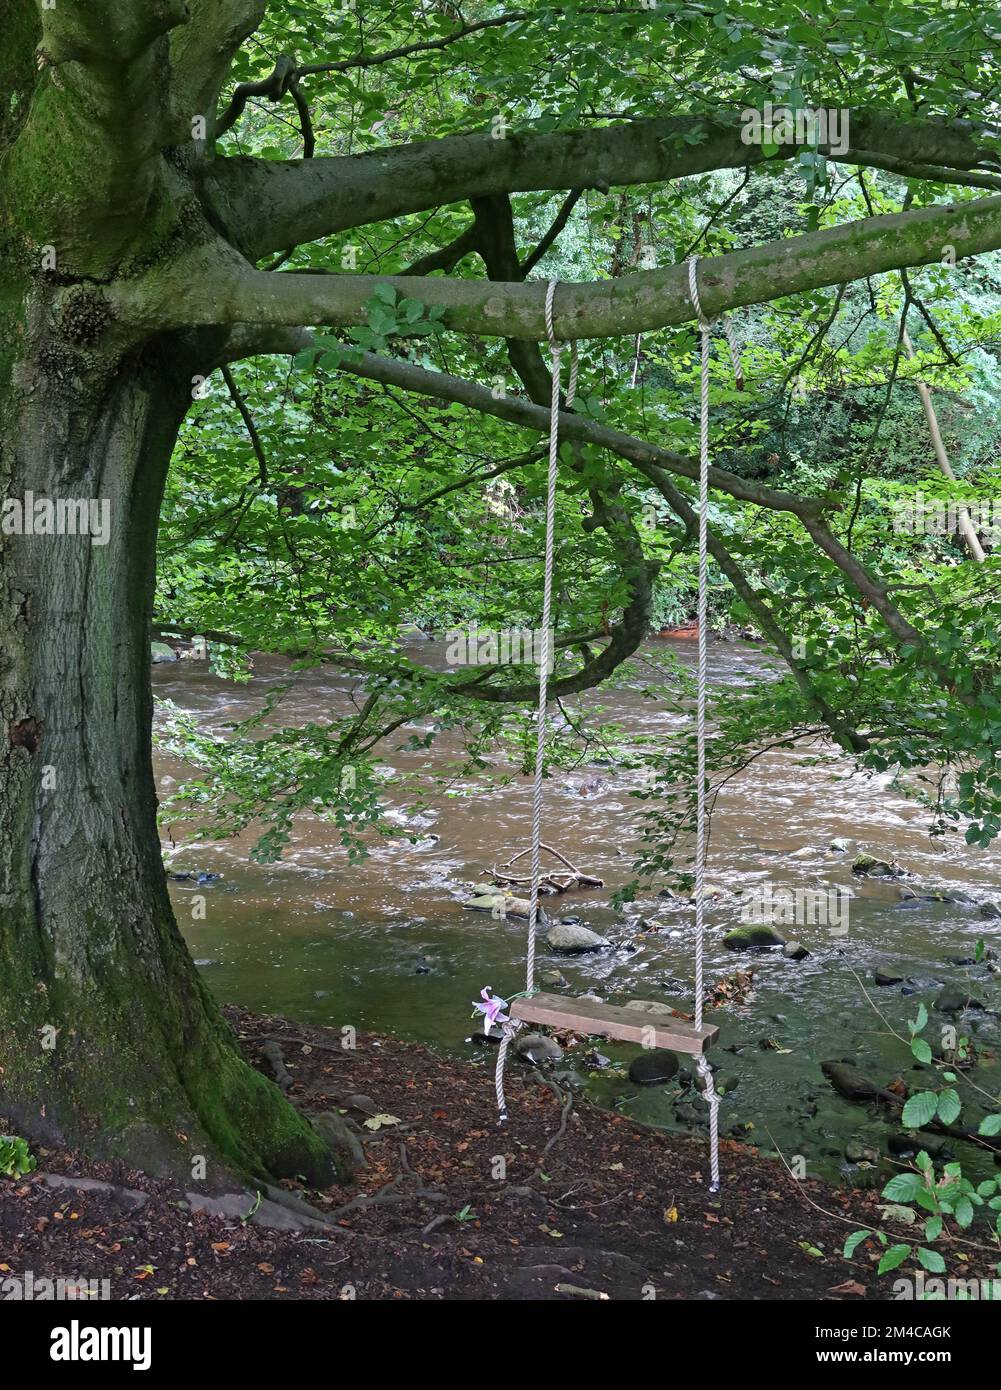 Handmade swing on a branch of a tree, near river Goyt, Brabyns park, Marple, Stockport, Cheshire, England, UK, SK6 5DT Stock Photo